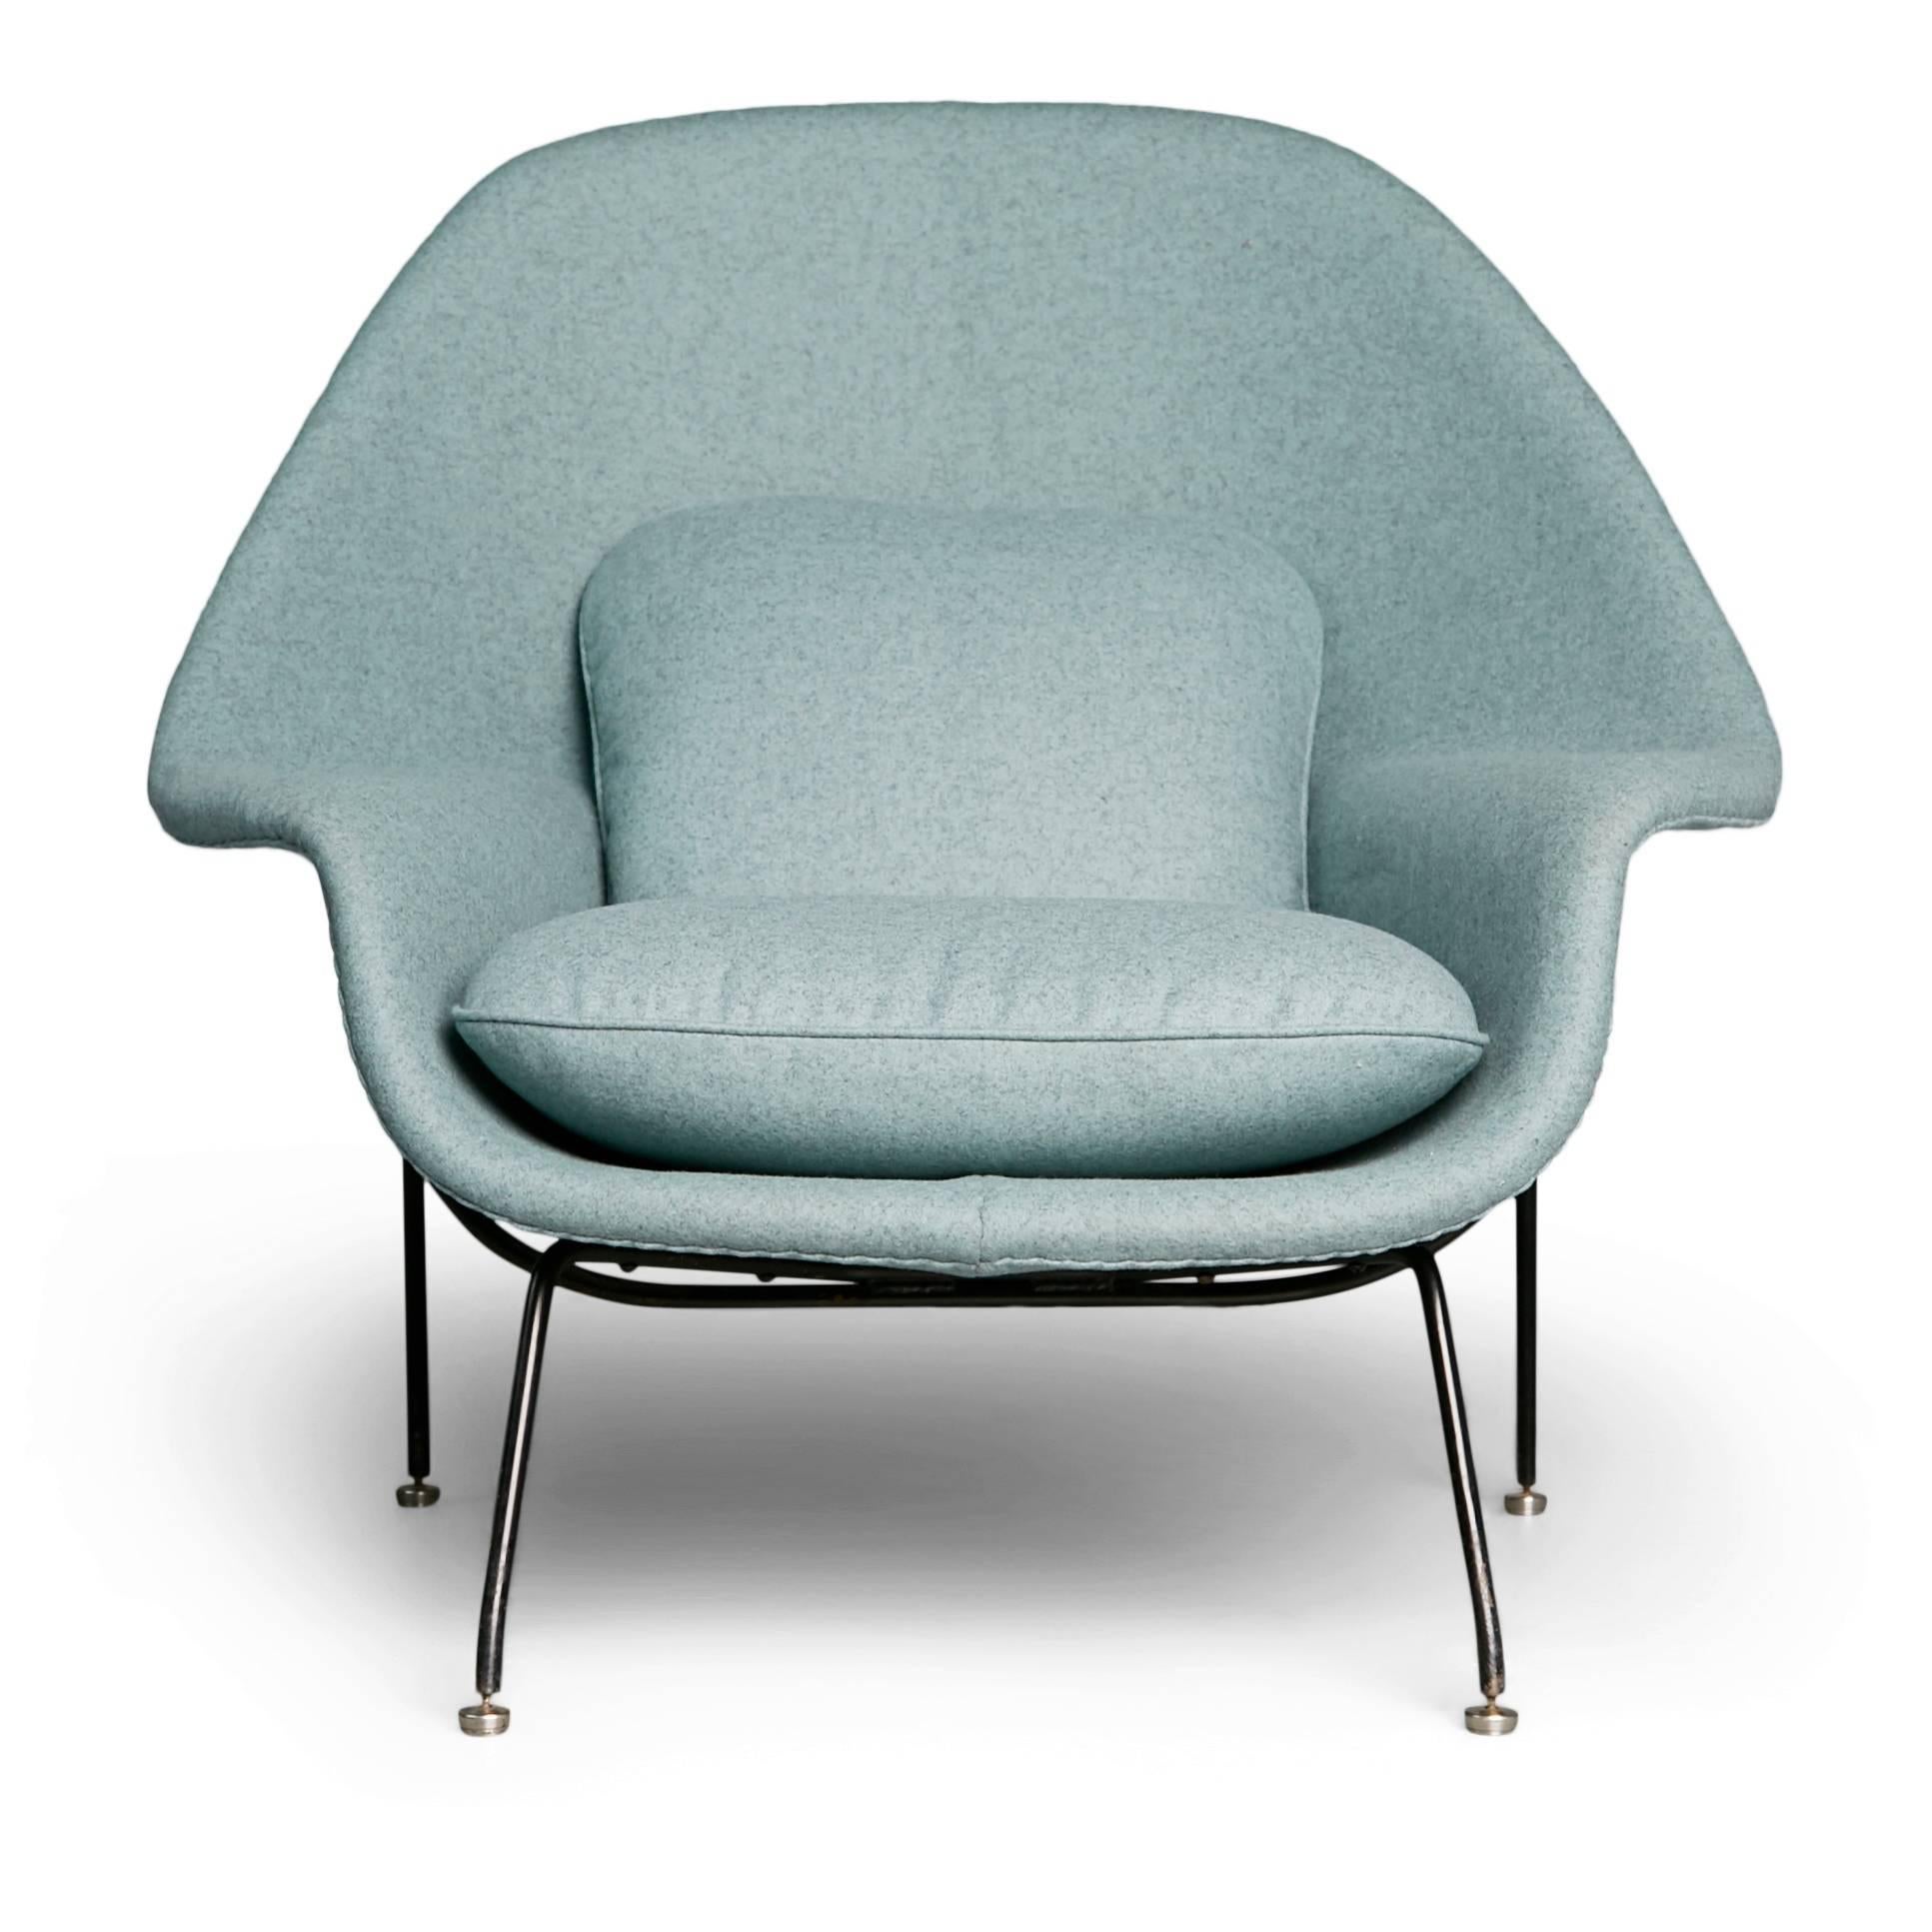 Mid-Century Modern Newly Upholstered Womb Chair and Ottoman by Eero Saarinen for Knoll, circa 1950